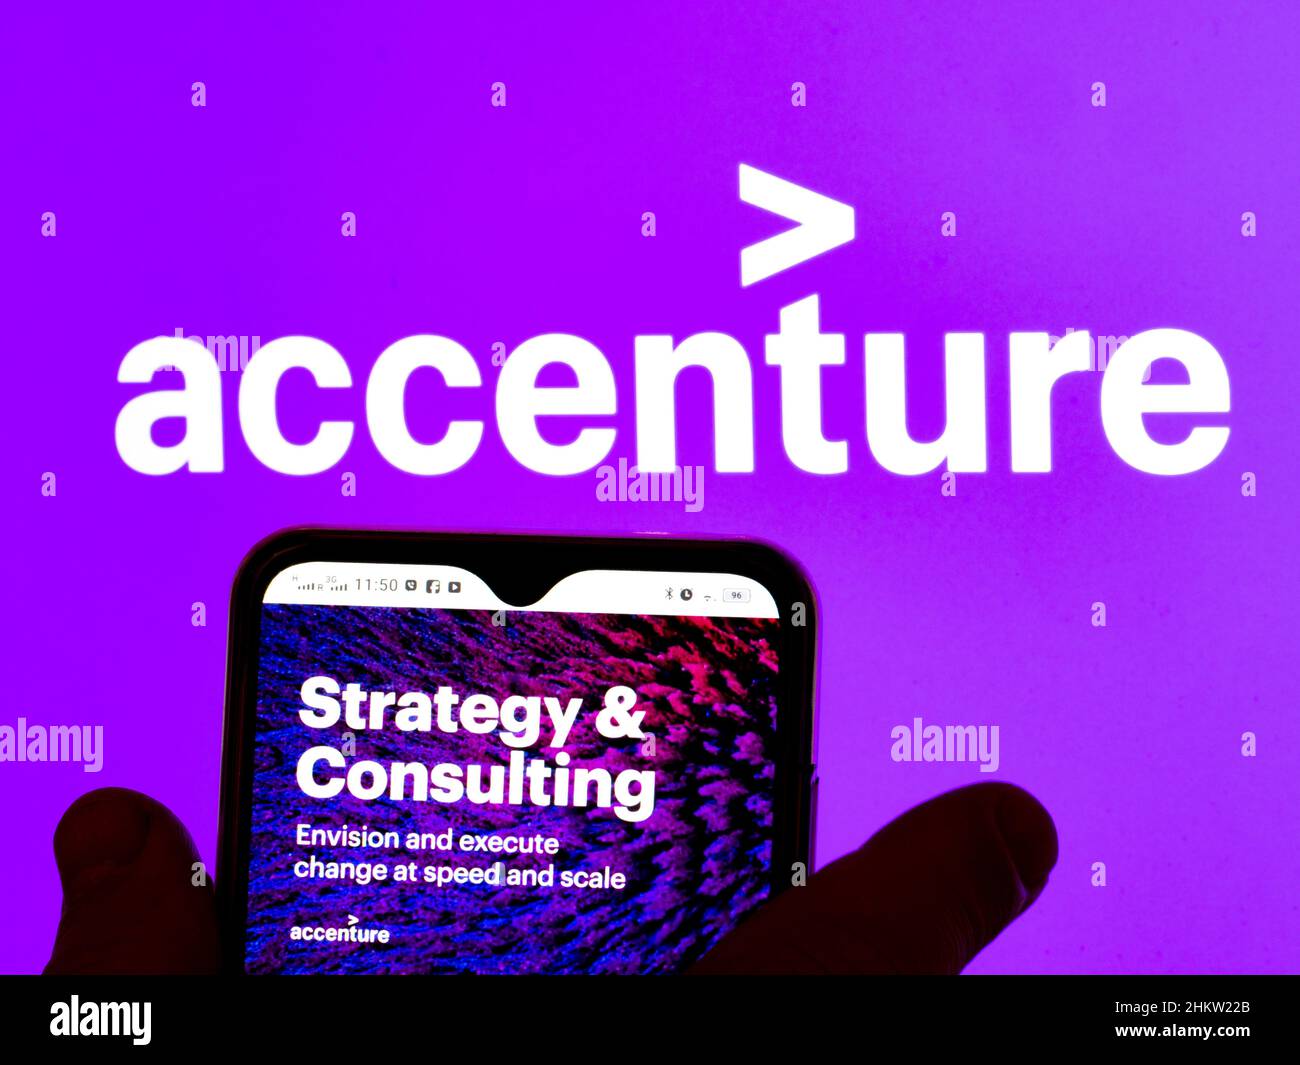 Strategy consulting accenture baxter band